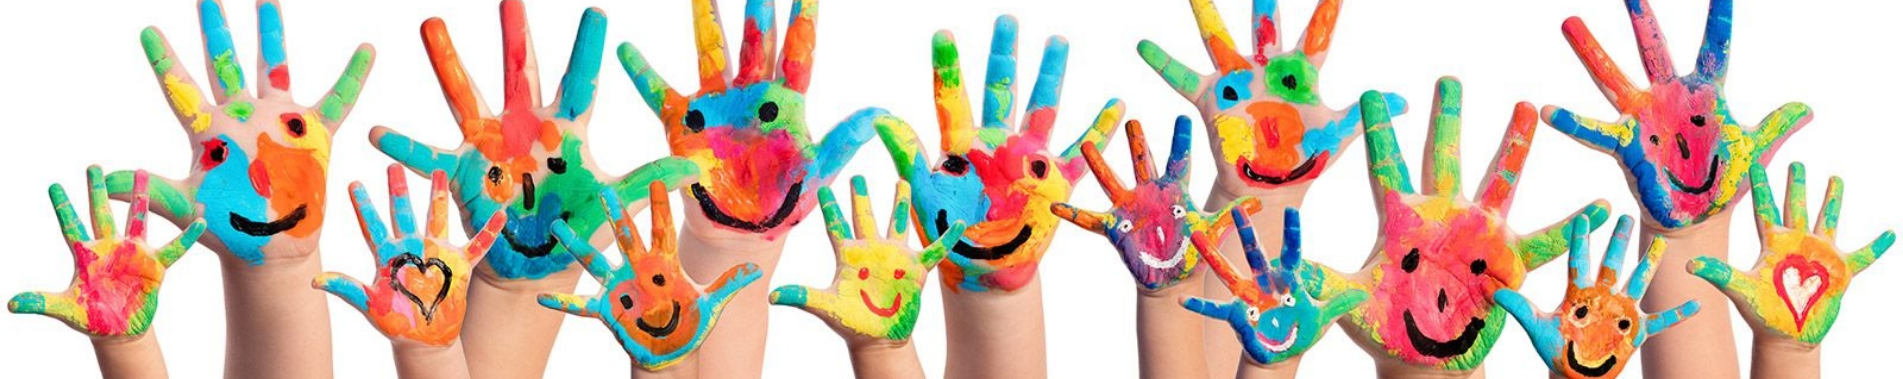 A group of children 's hands painted in different colors with smiley faces on them